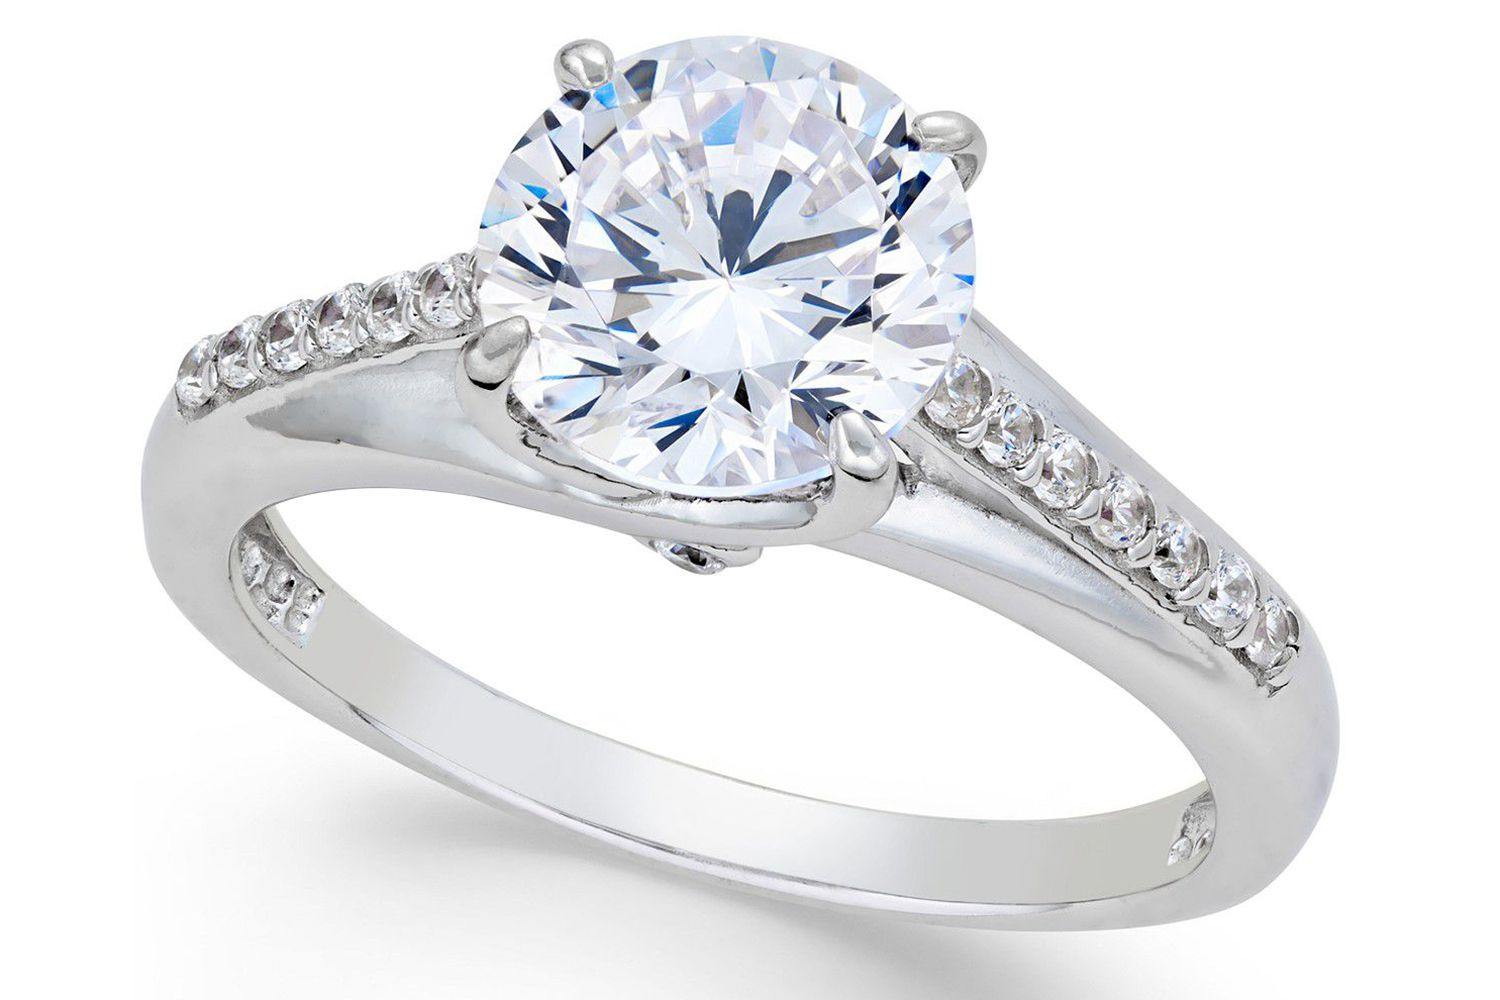 Picture Of Wedding Rings
 The 6 Best Fake Engagement Rings to Wear When You Travel